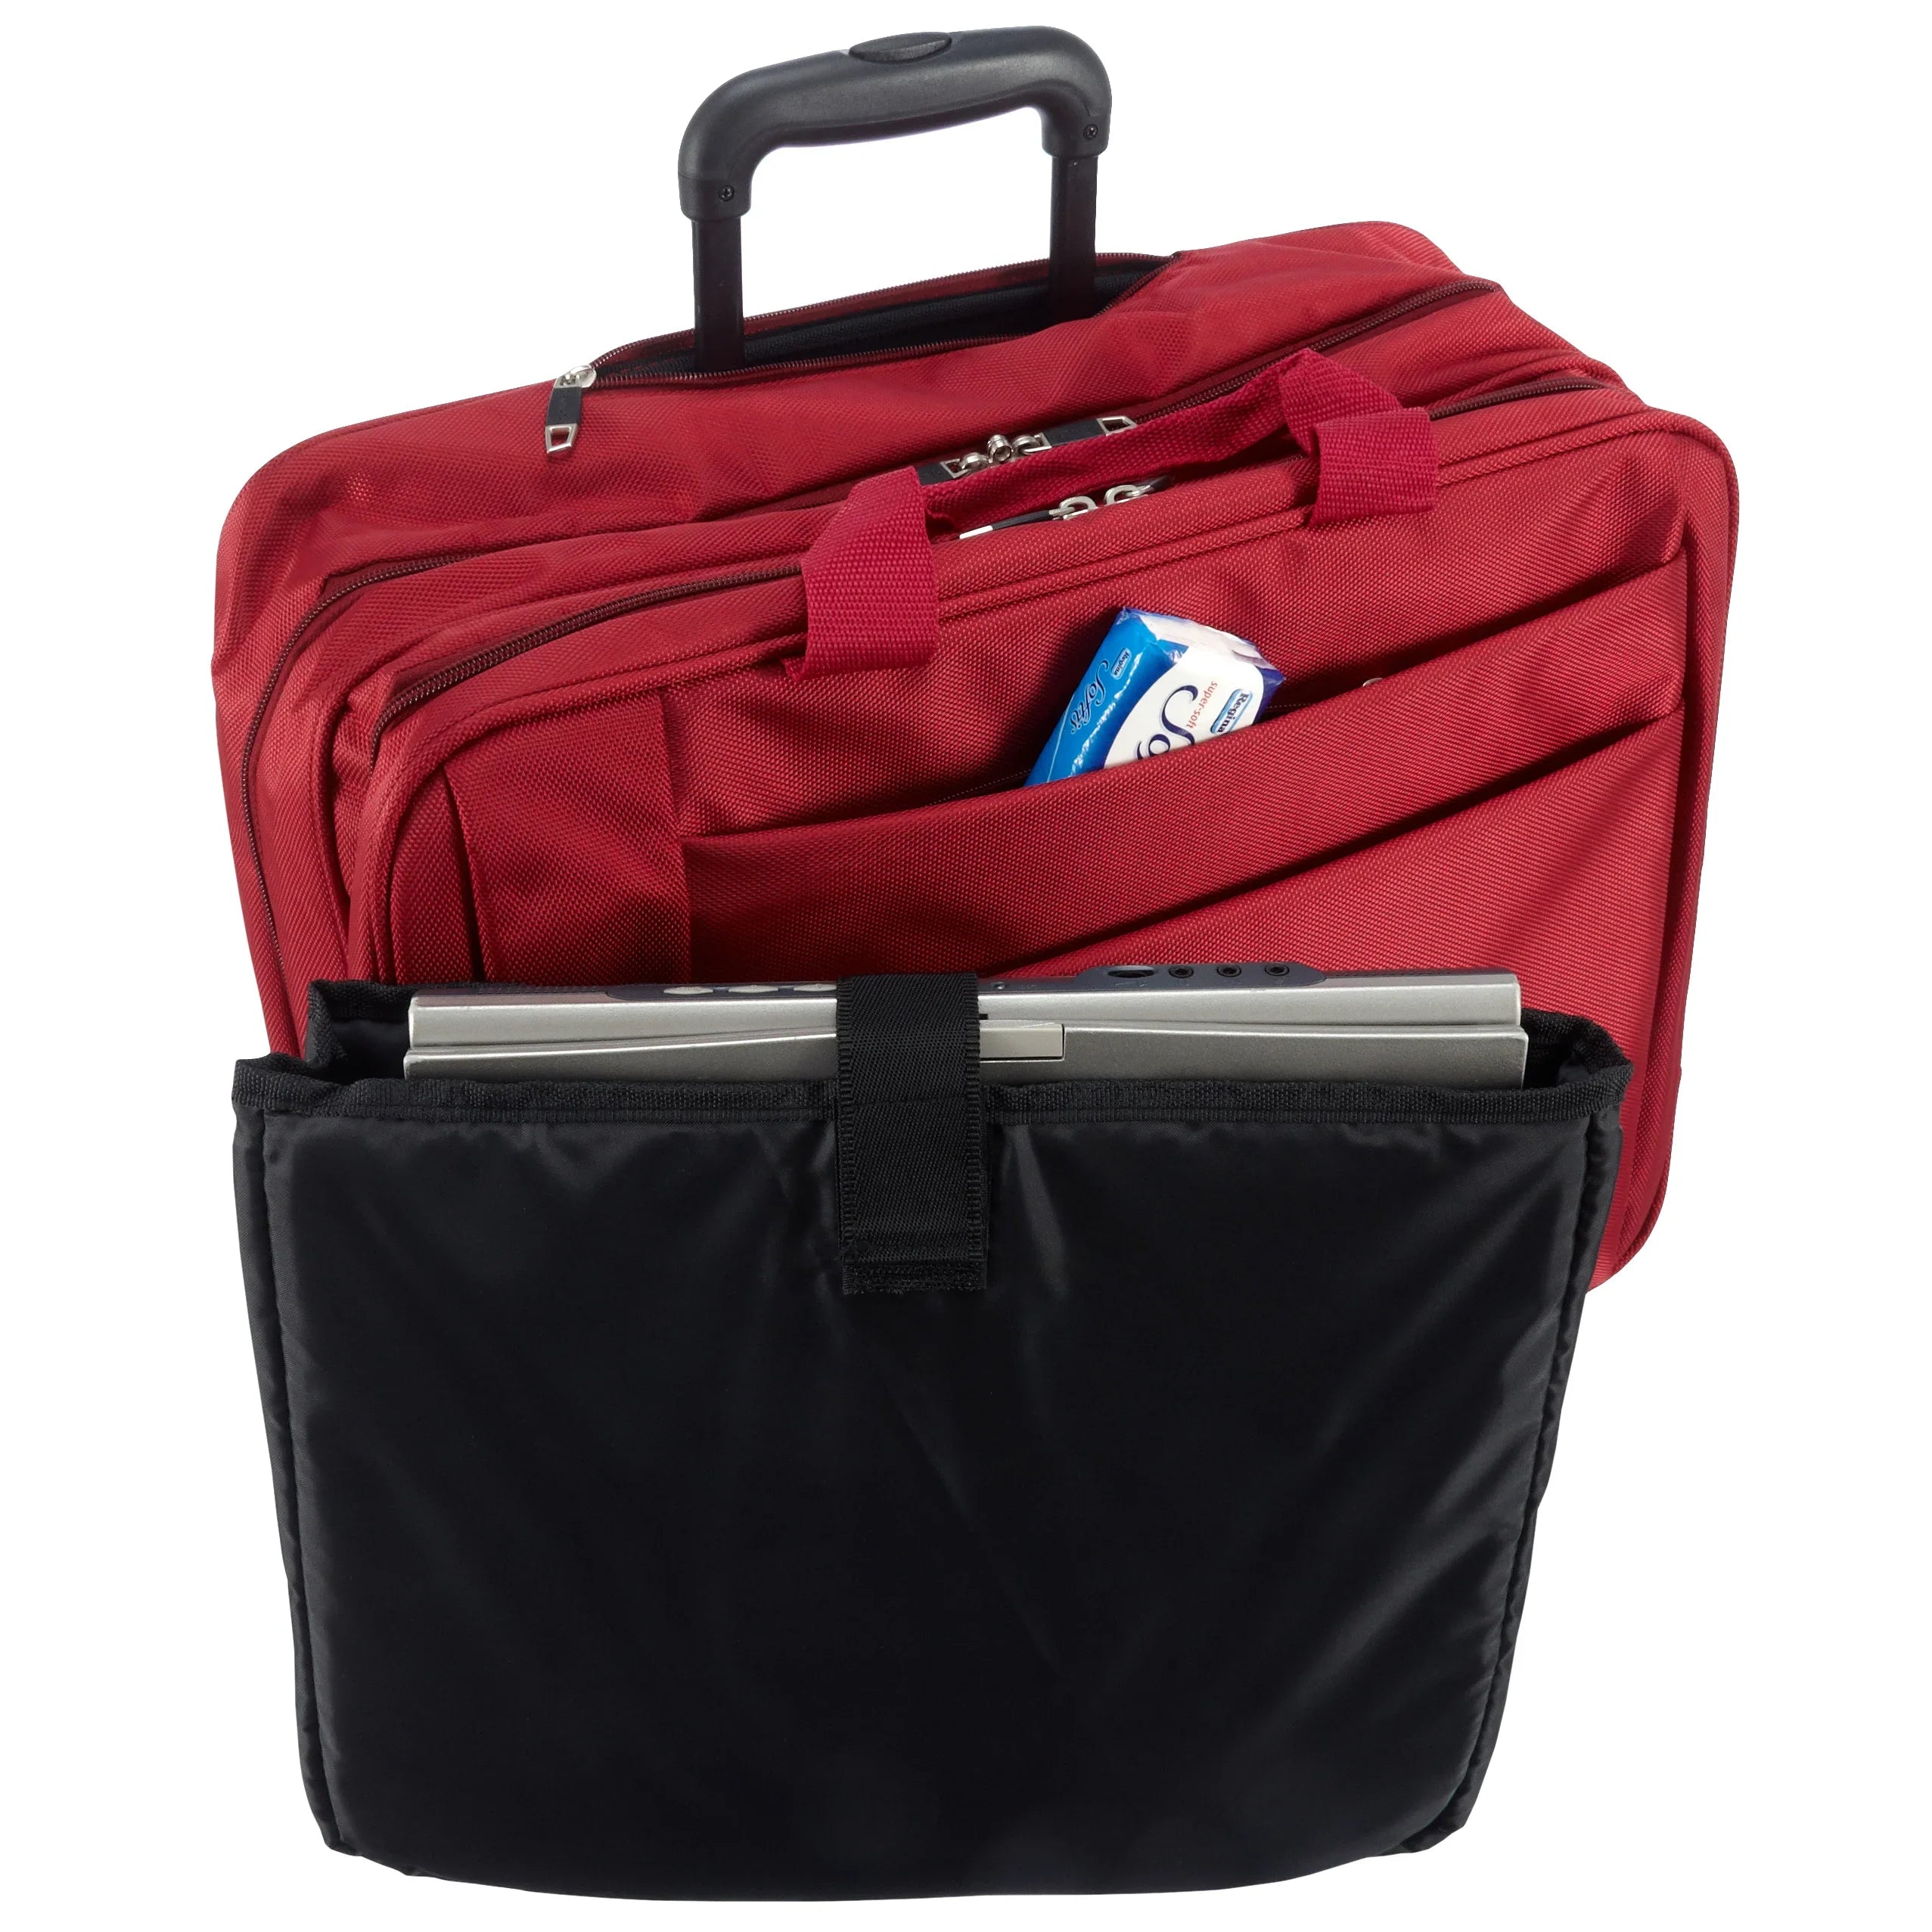 Dermata Business Mobile Office 44 cm - red